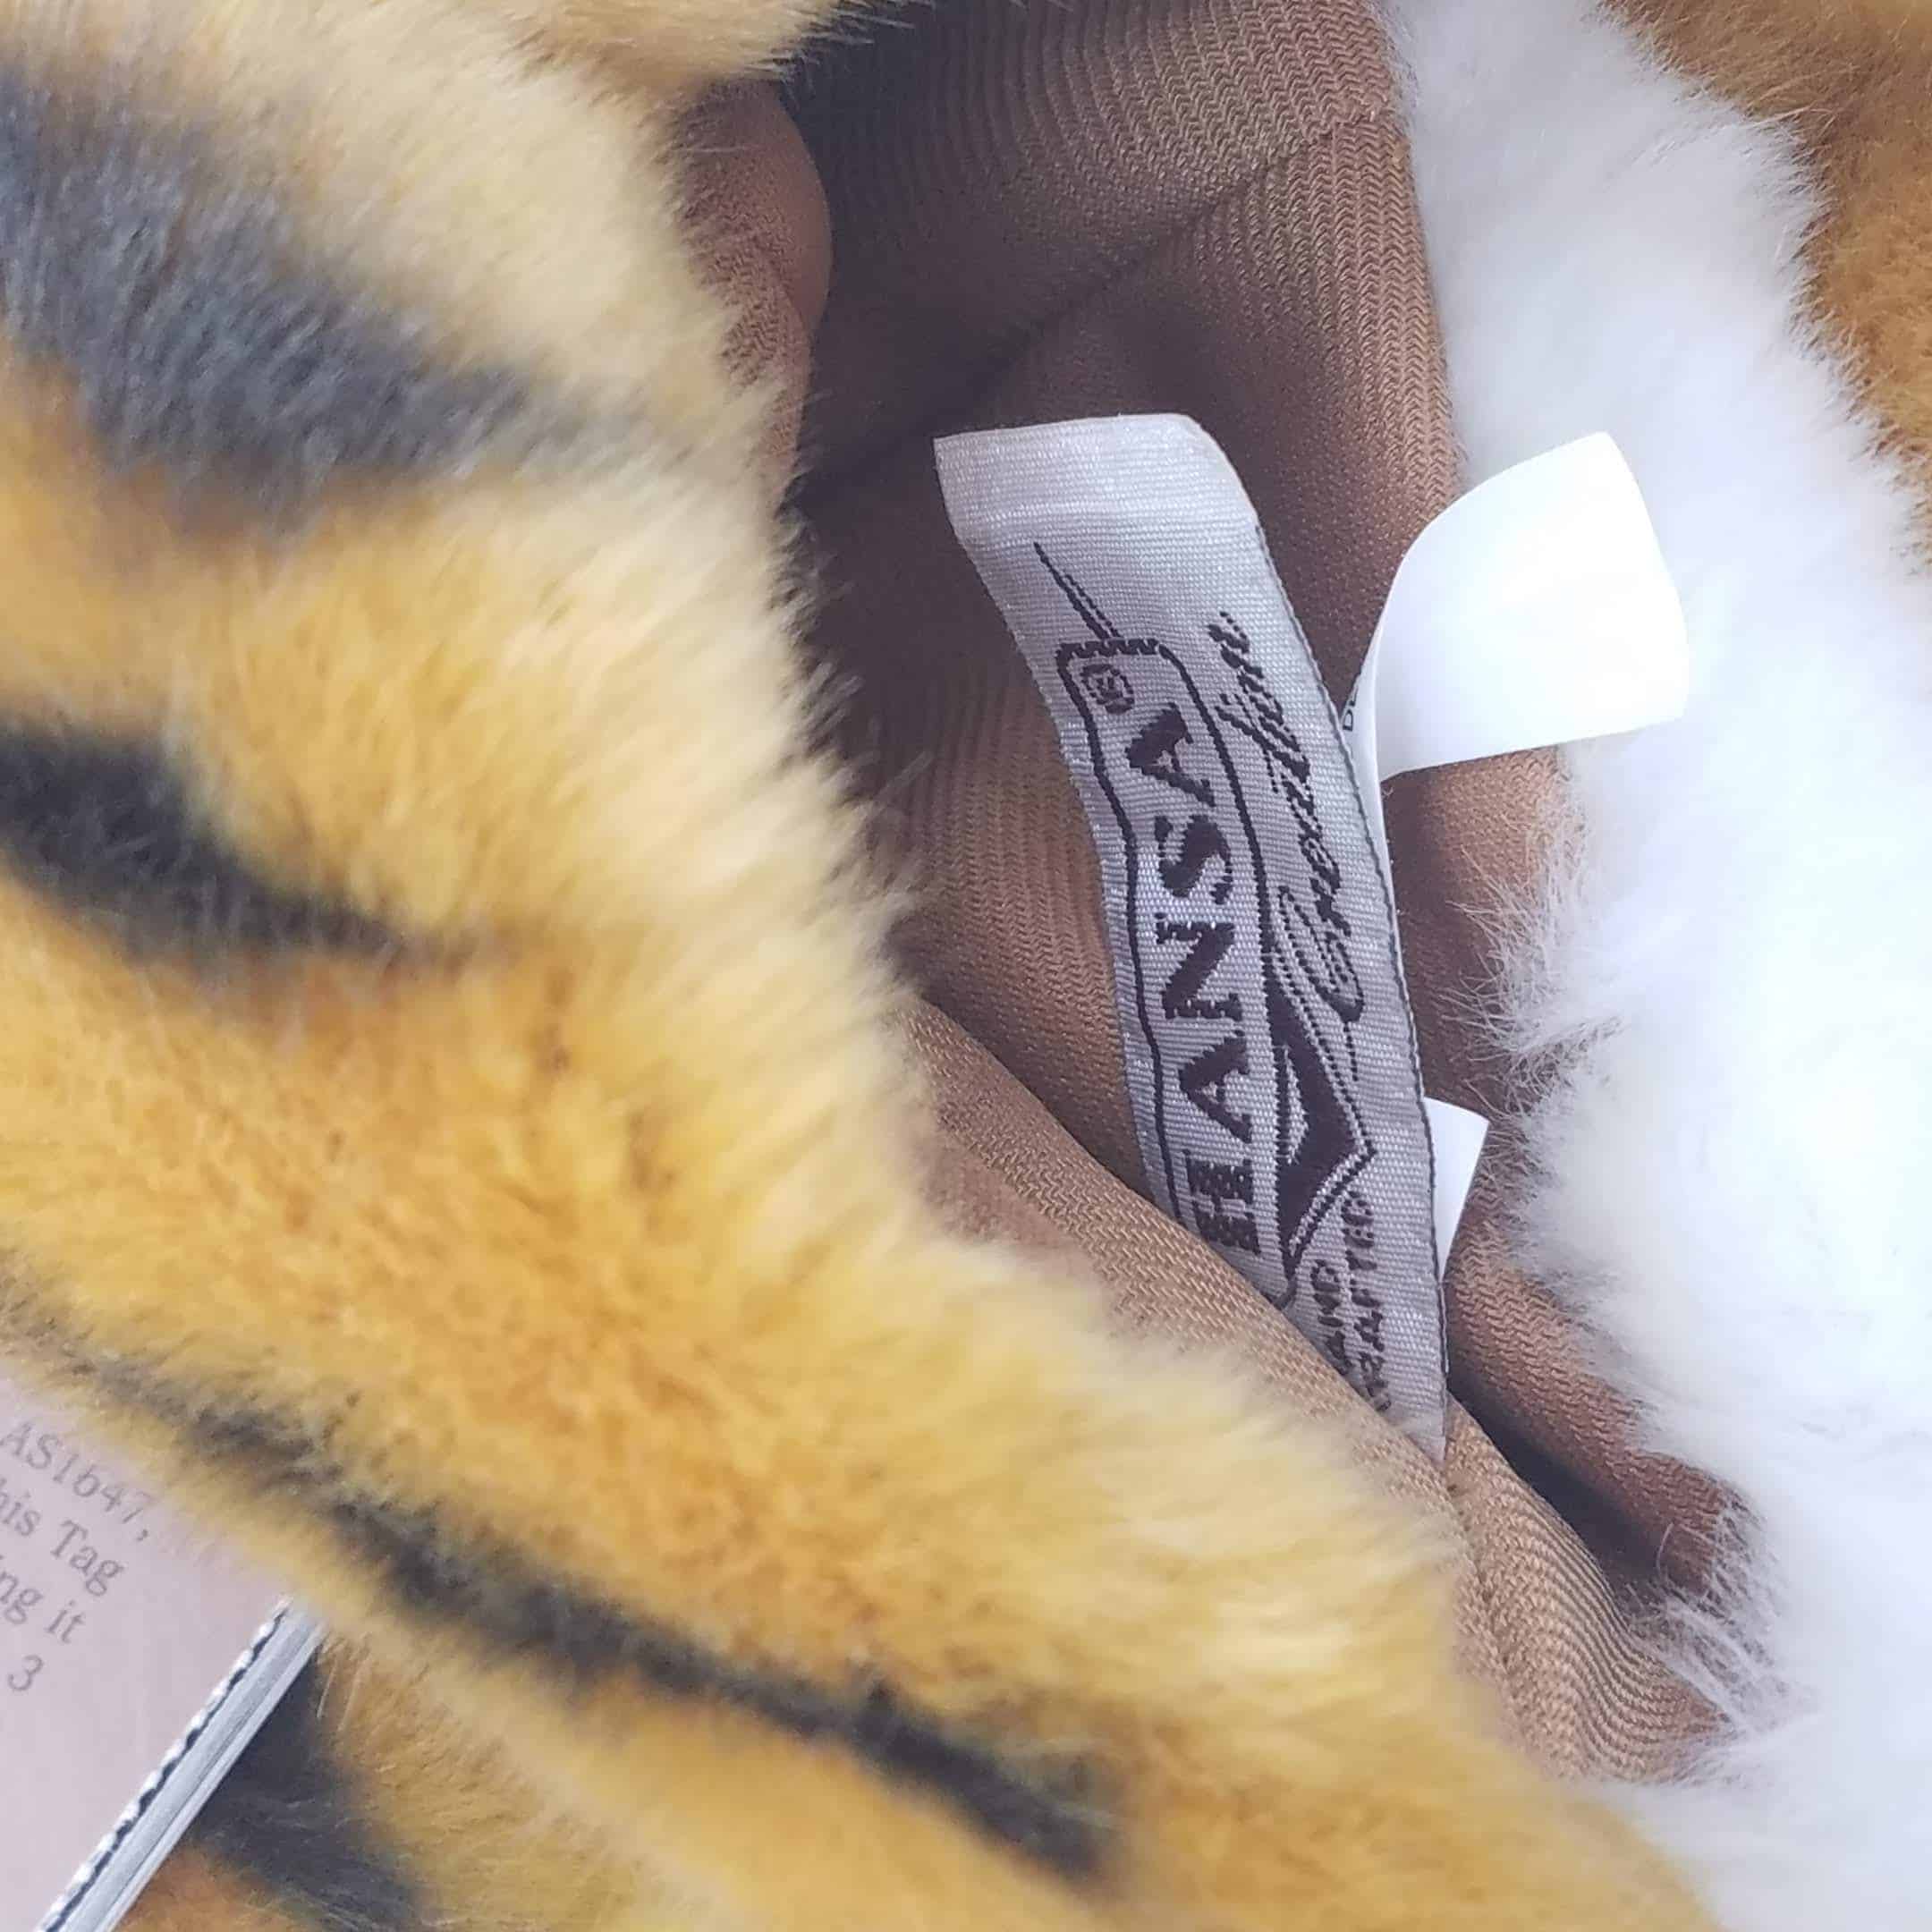 This Tiger Hand Puppet by Hansa True to Life Looking Soft Plush Animal Learning Toy is made with love by Premier Homegoods! Shop more unique gift ideas today with Spots Initiatives, the best way to support creators.